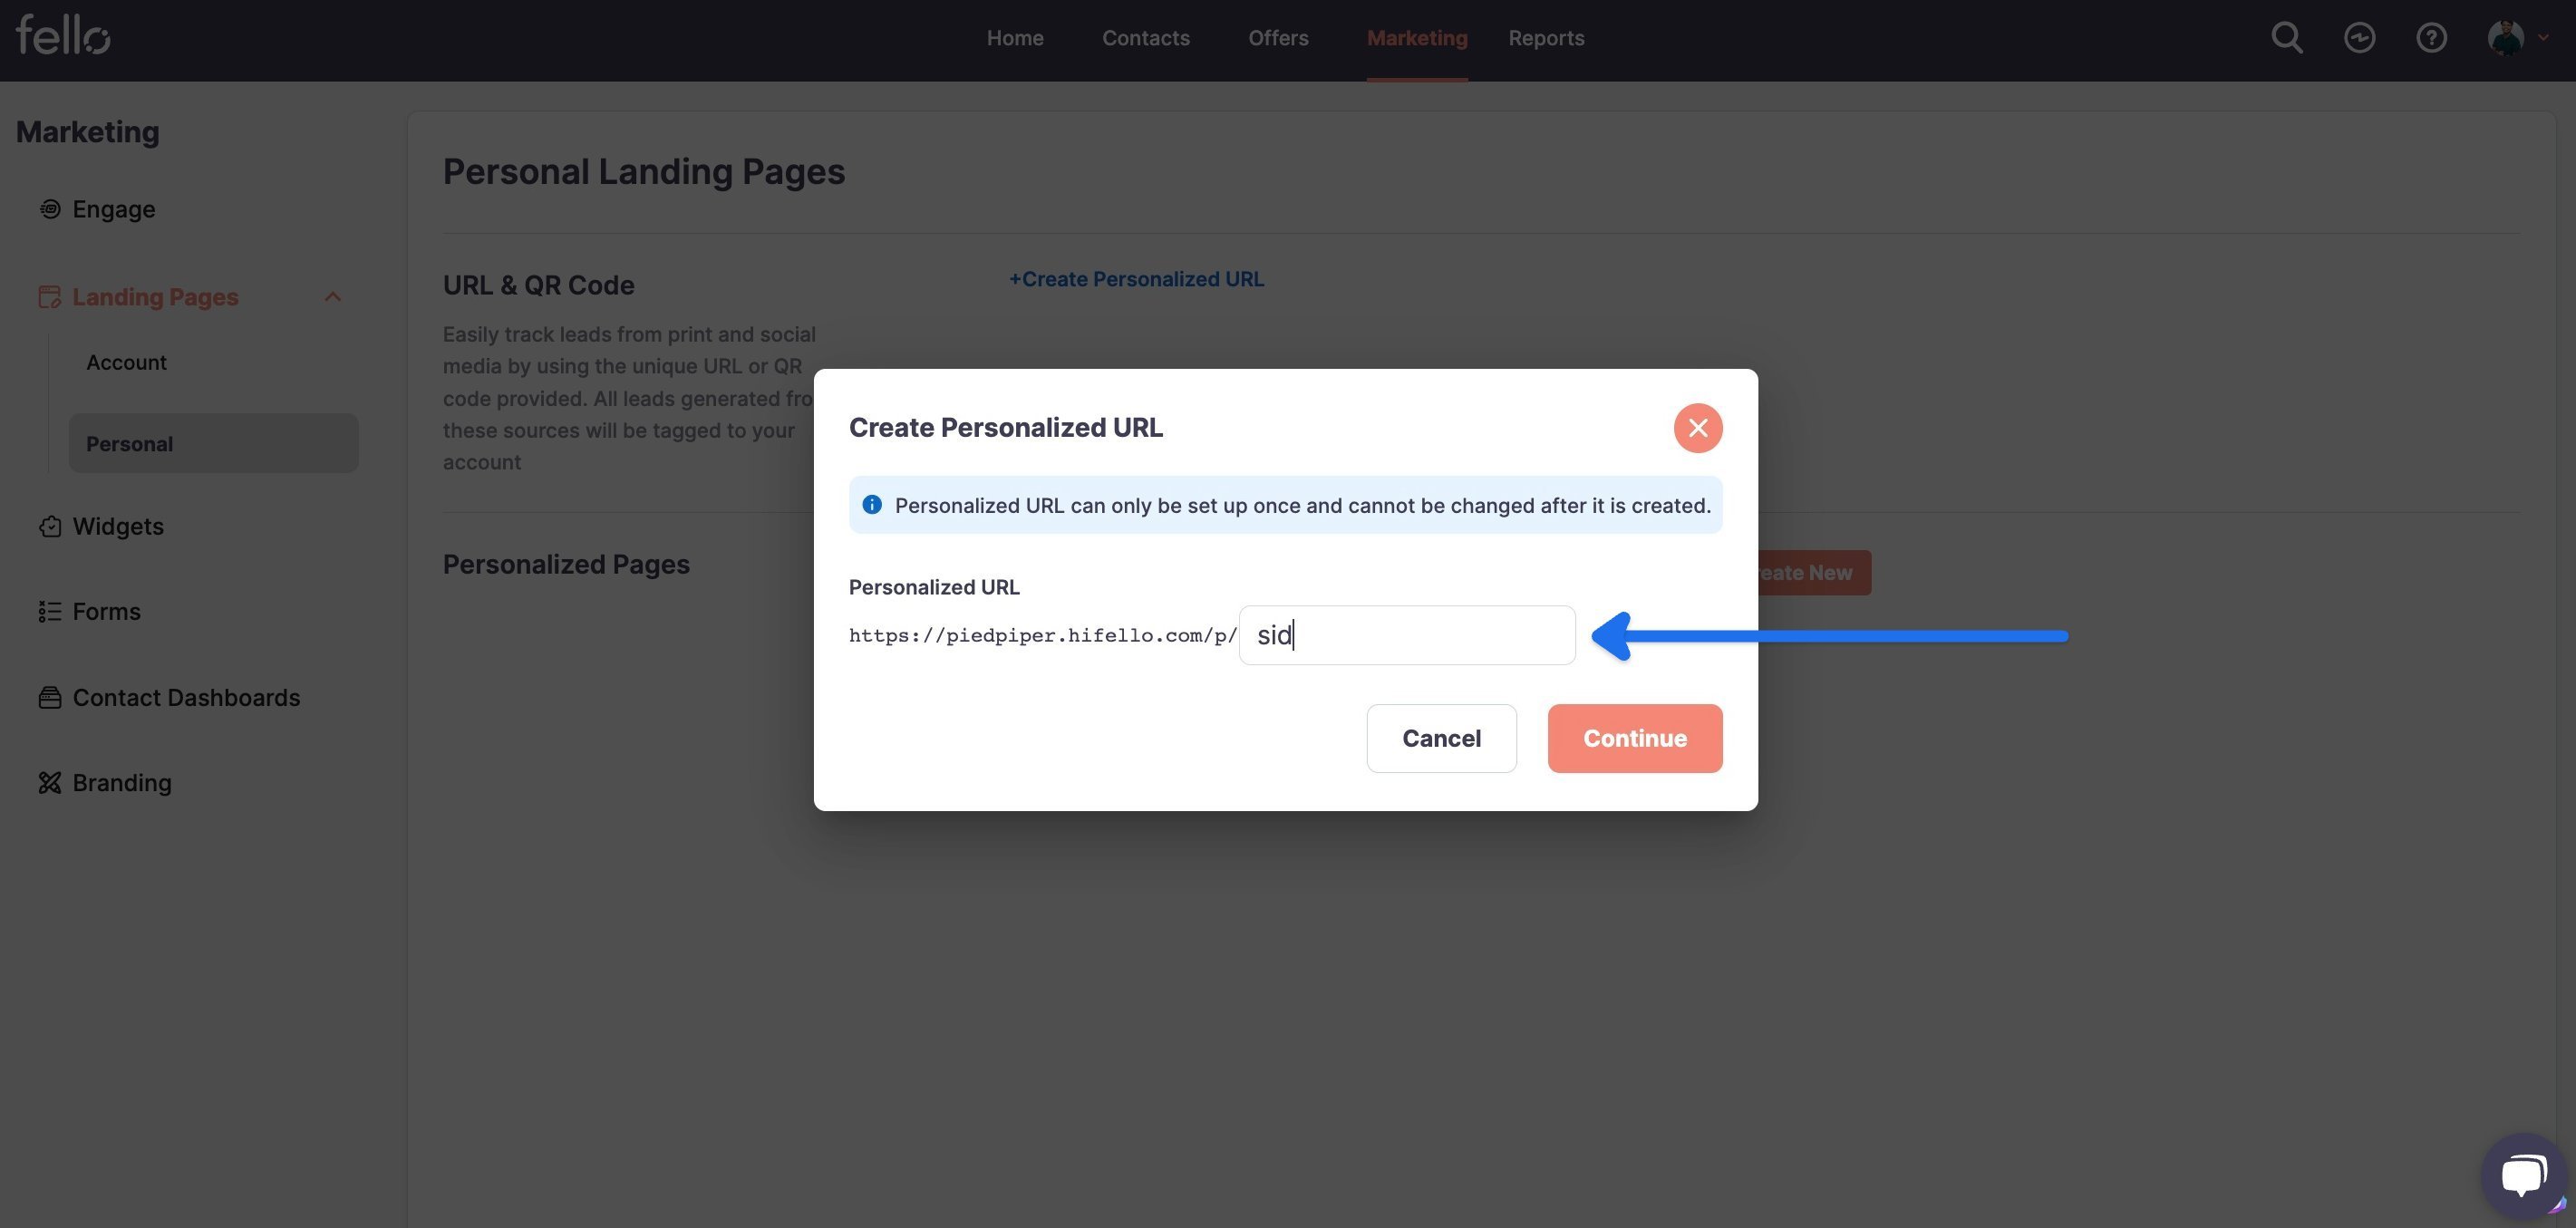 Create Personalized URL pop-up